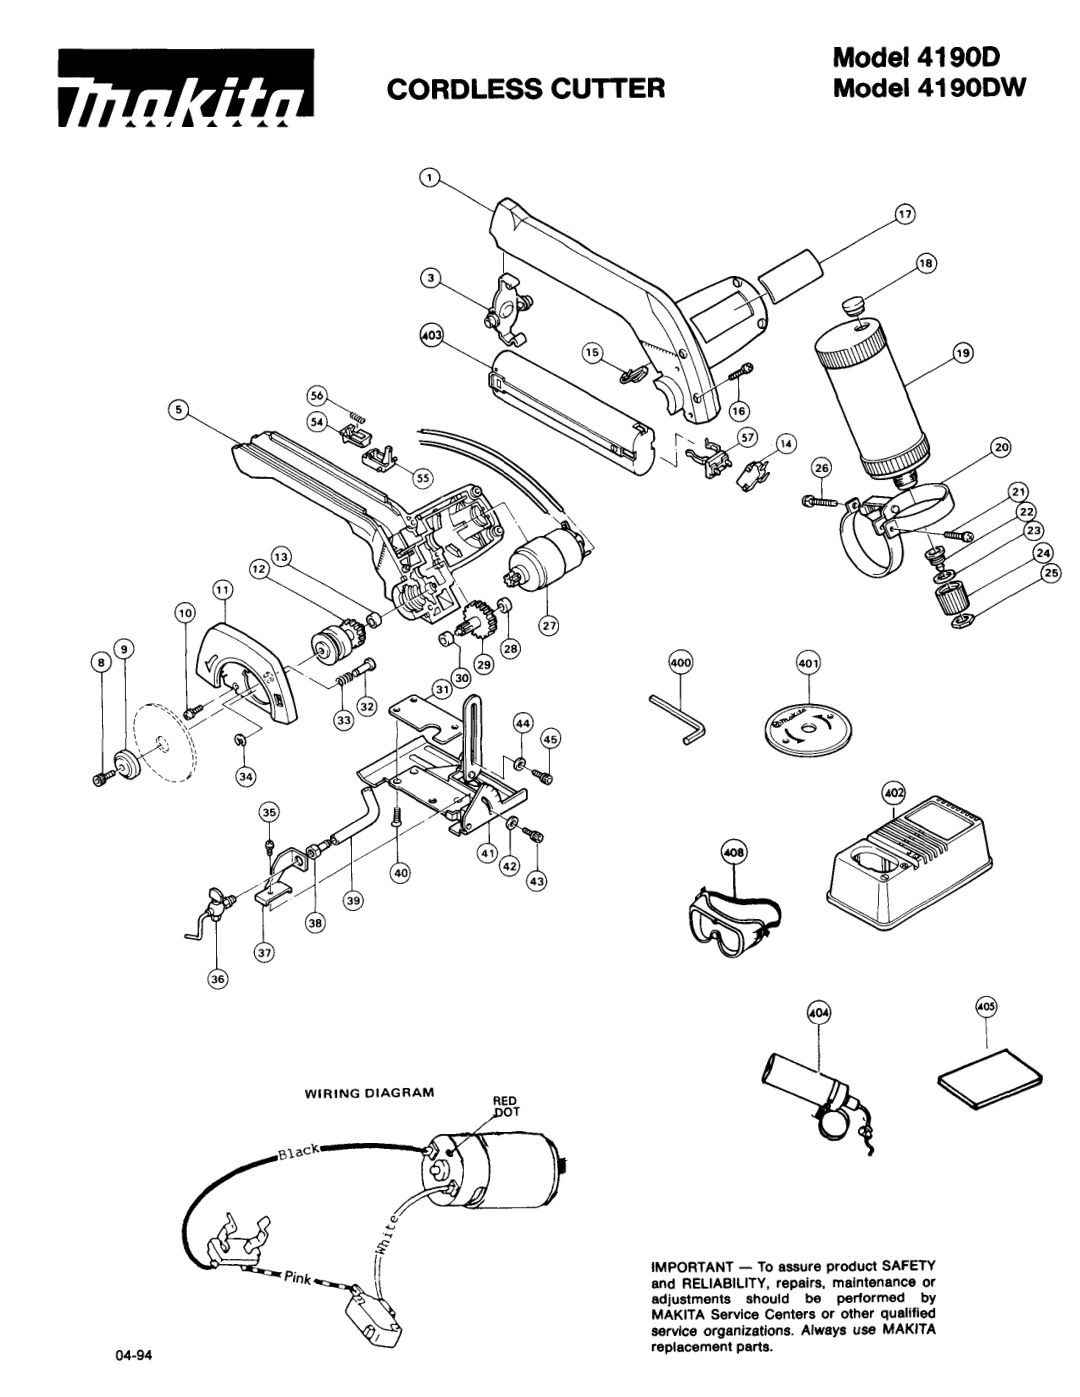 Makita 41900 manual Cutter, Model 419ODW, adjustments should be performed by, 04-94, replacement parts 